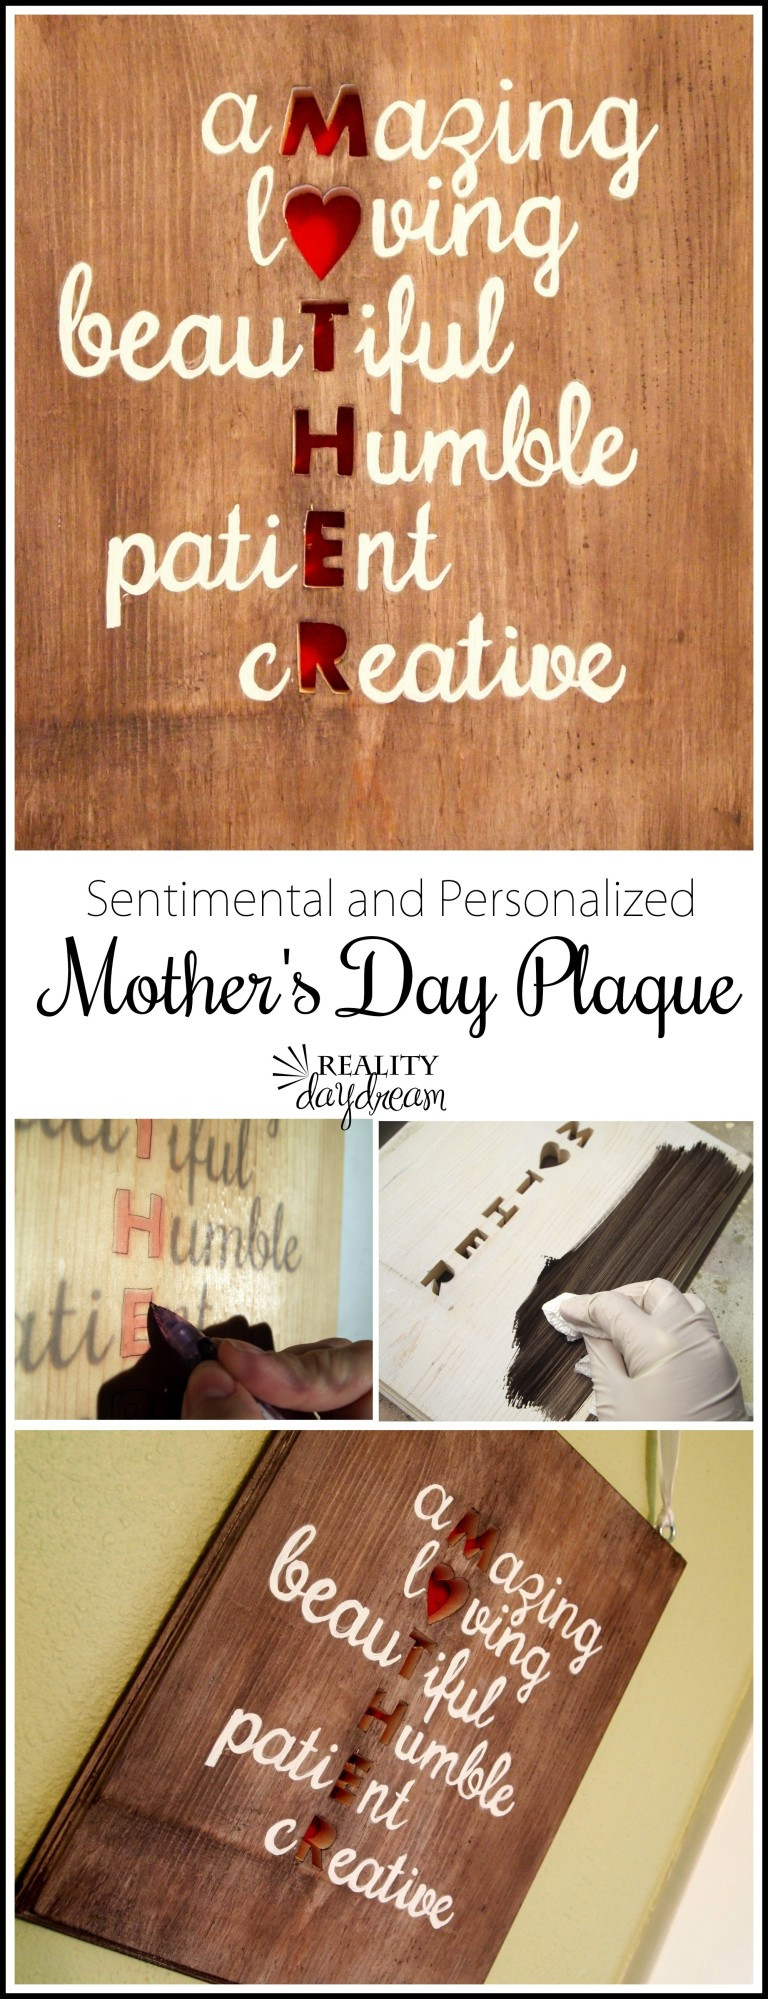 Last Minute DIY Gifts For Mom
 15 Wonderful Last Minute DIY Mother s Day Gift Ideas In